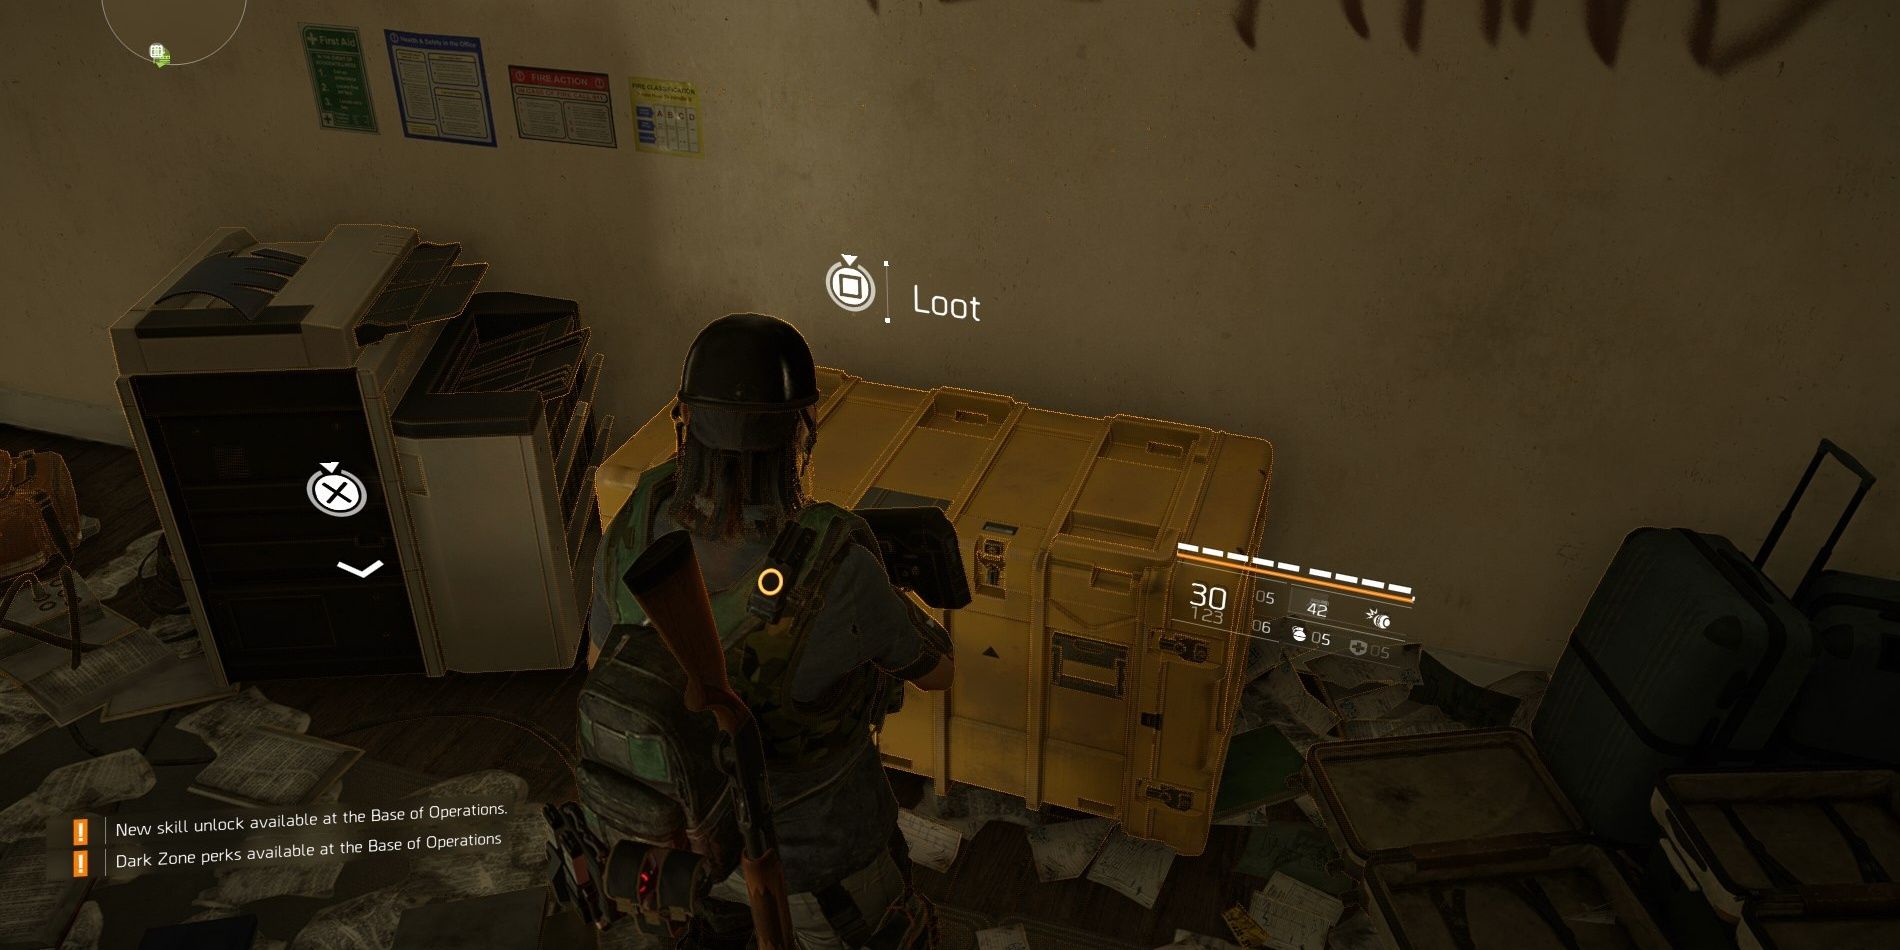 A player raids a supply room in The Division 2